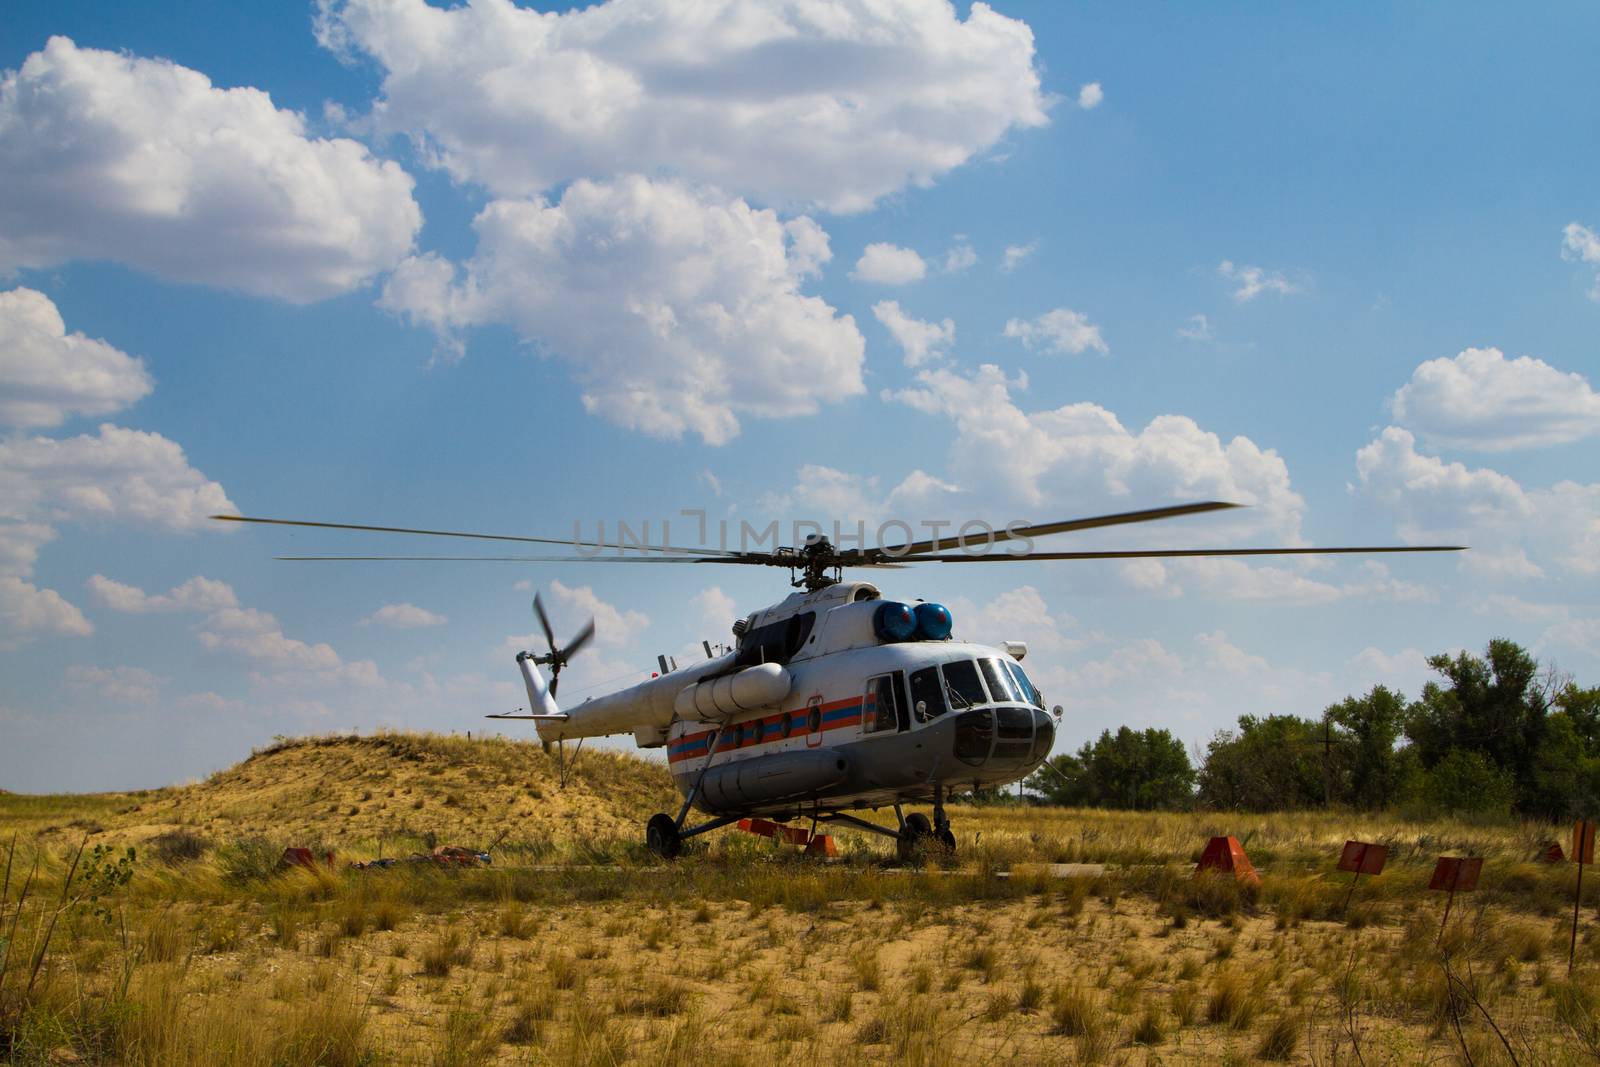 Firefighting helicopter landed after successfully fighting a fire